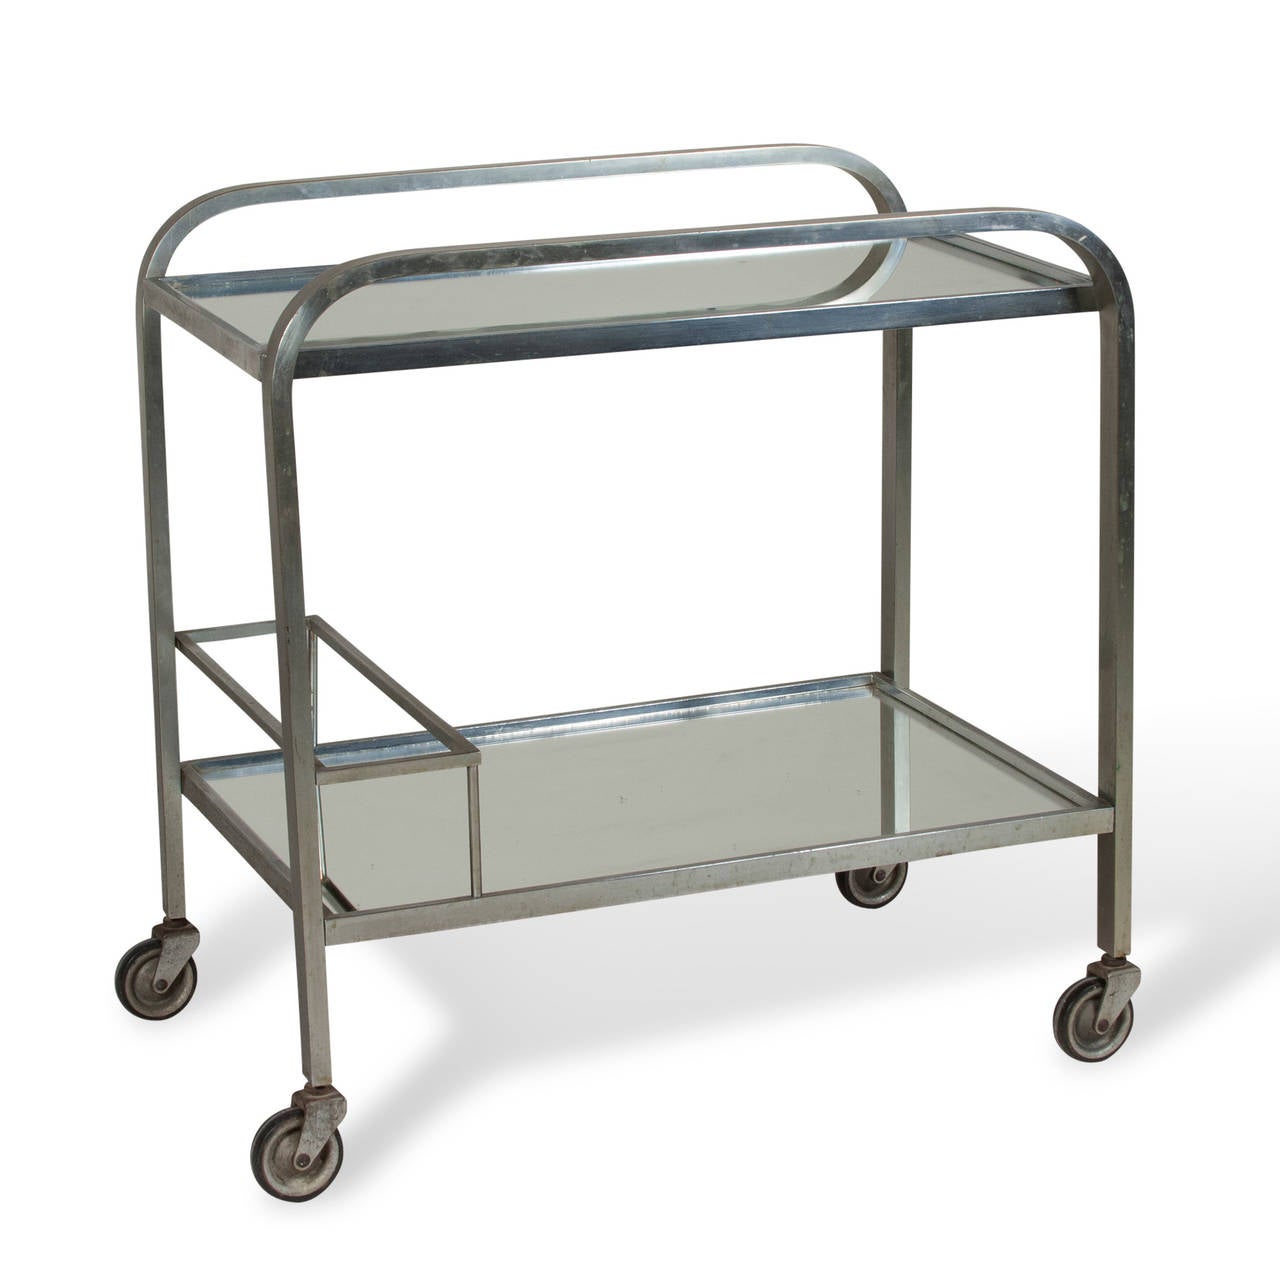 Mirrored two tier serving cart, chrome frame, raised rail handles and lower bottle storage area, on casters. French 1930s. W 16 in x L 25.6 in, H 26 in. (Item #2120)